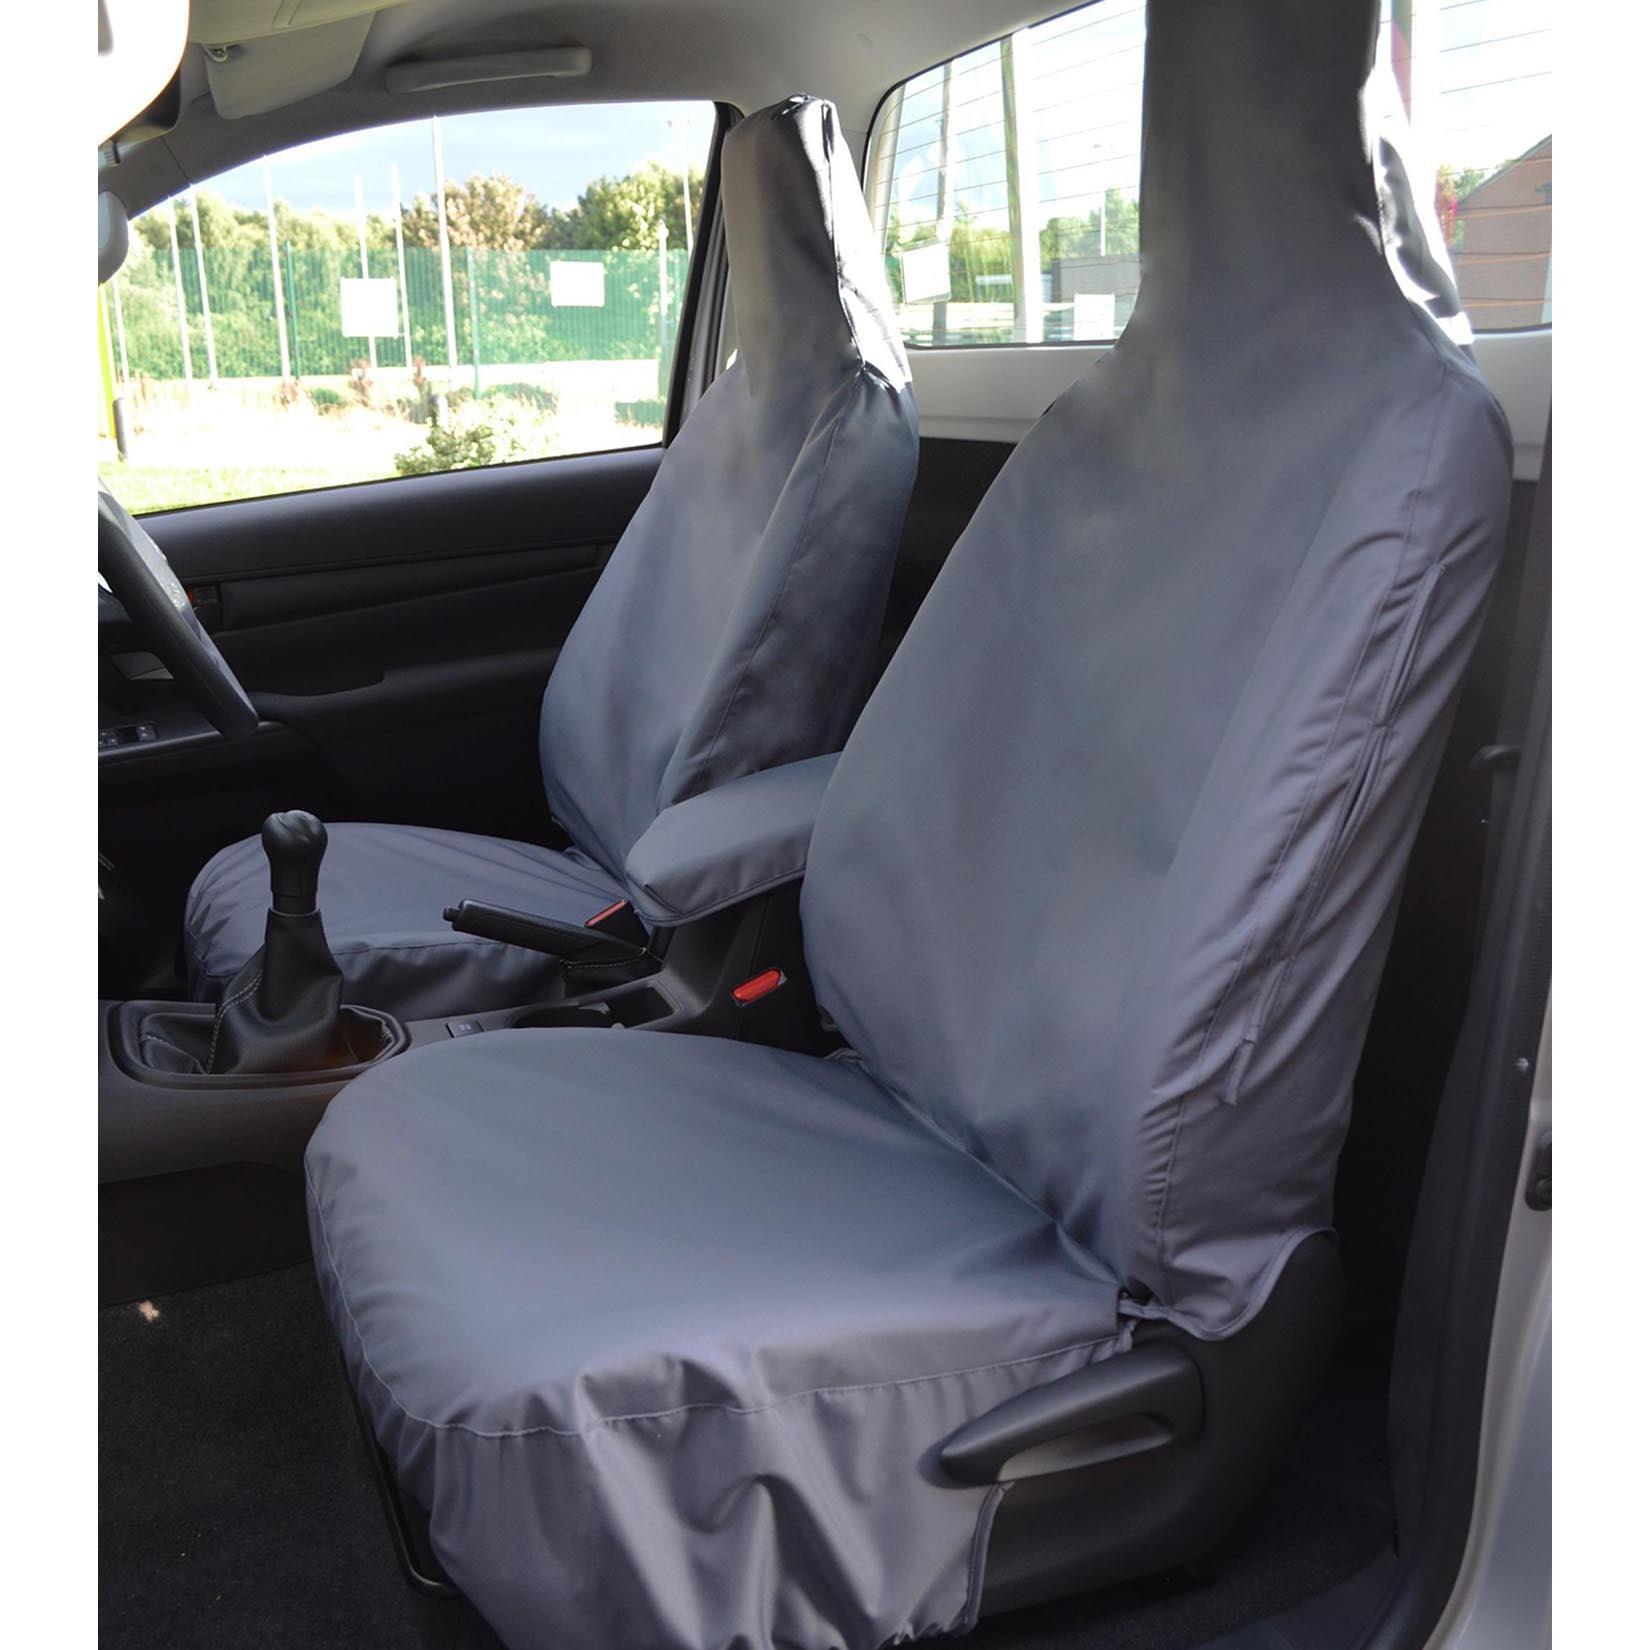 TOYOTA HILUX SINGLE CAB 2016 ON PAIR SEAT COVERS - GREY - Storm Xccessories2